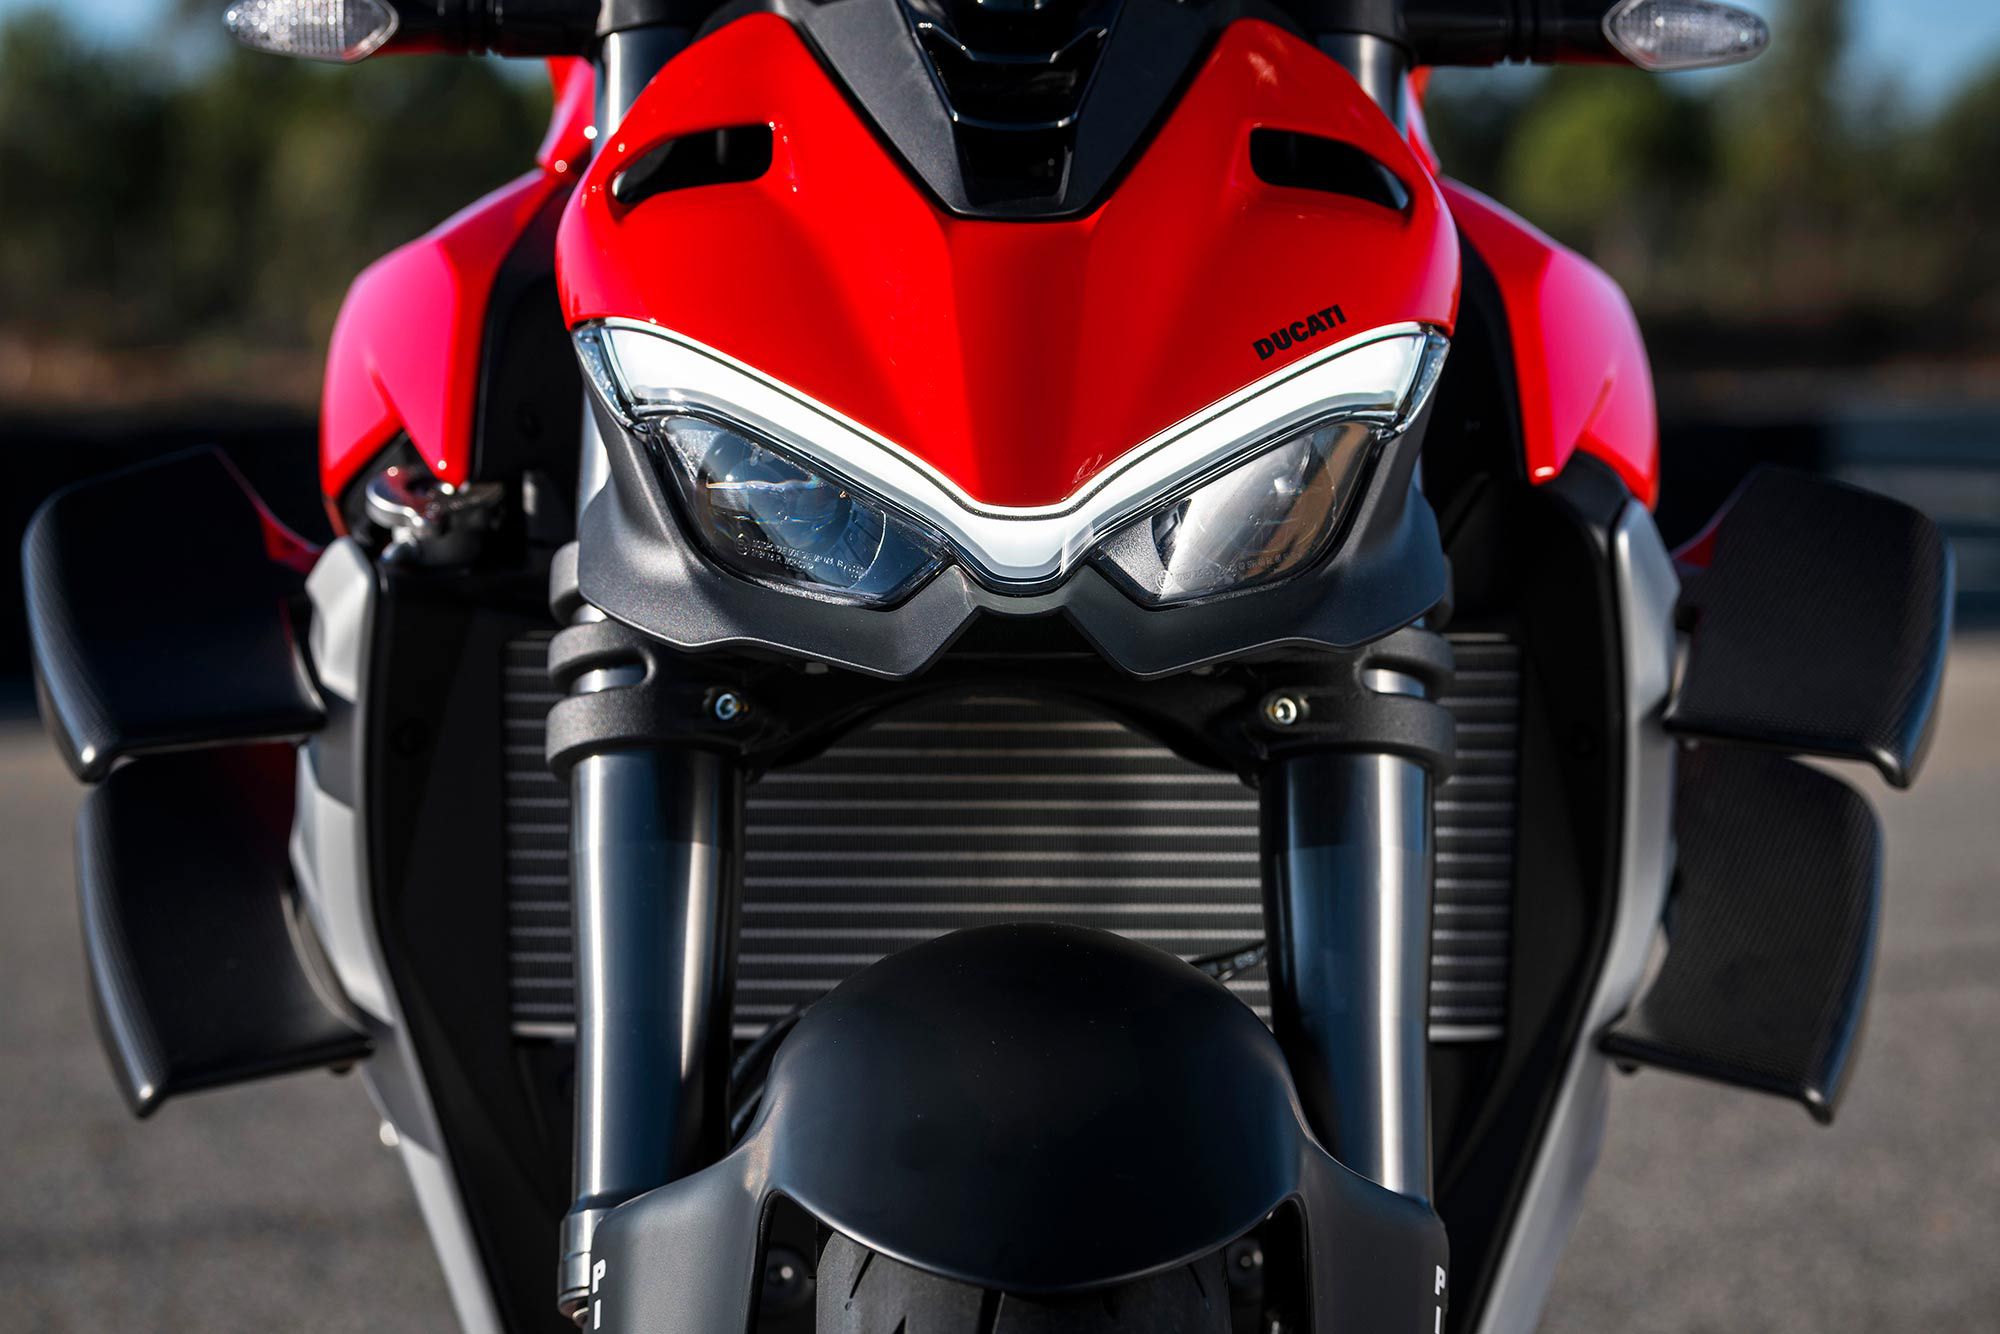 Ducati offers a number of performance-minded accessories via its parts catalog, including biplane winglets, which are priced at a pretty staggering $1,492.